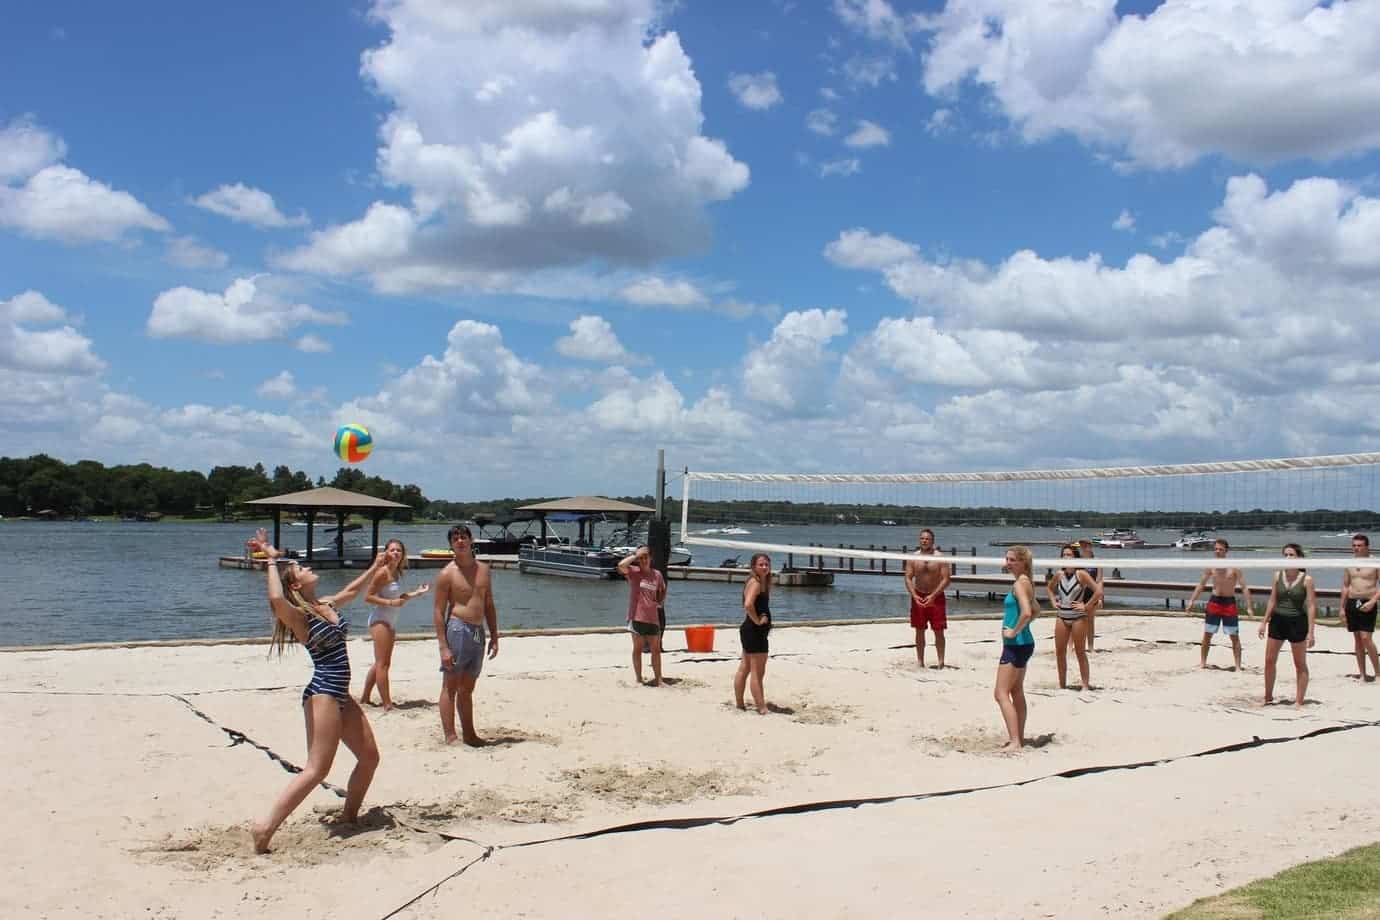 Many great ways to play at Long Cove like these friends playing sand volleyball on the beach of the lake